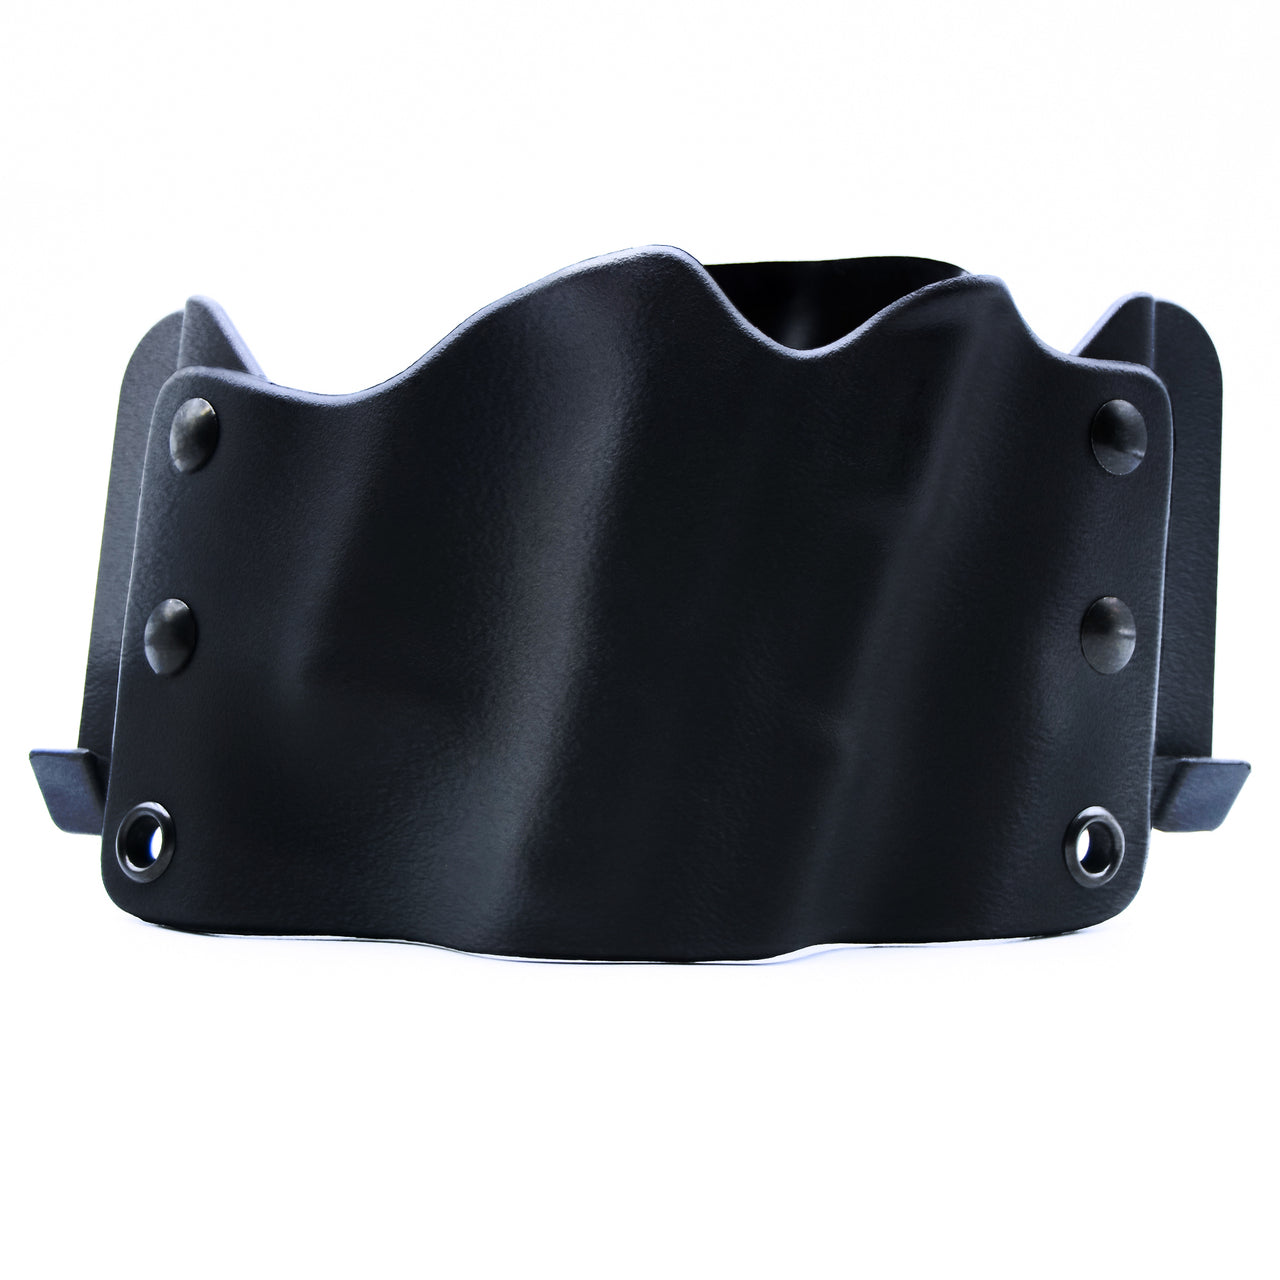 Box of 6 H60221 - OWB: Compact Clip Blk Holster, RH